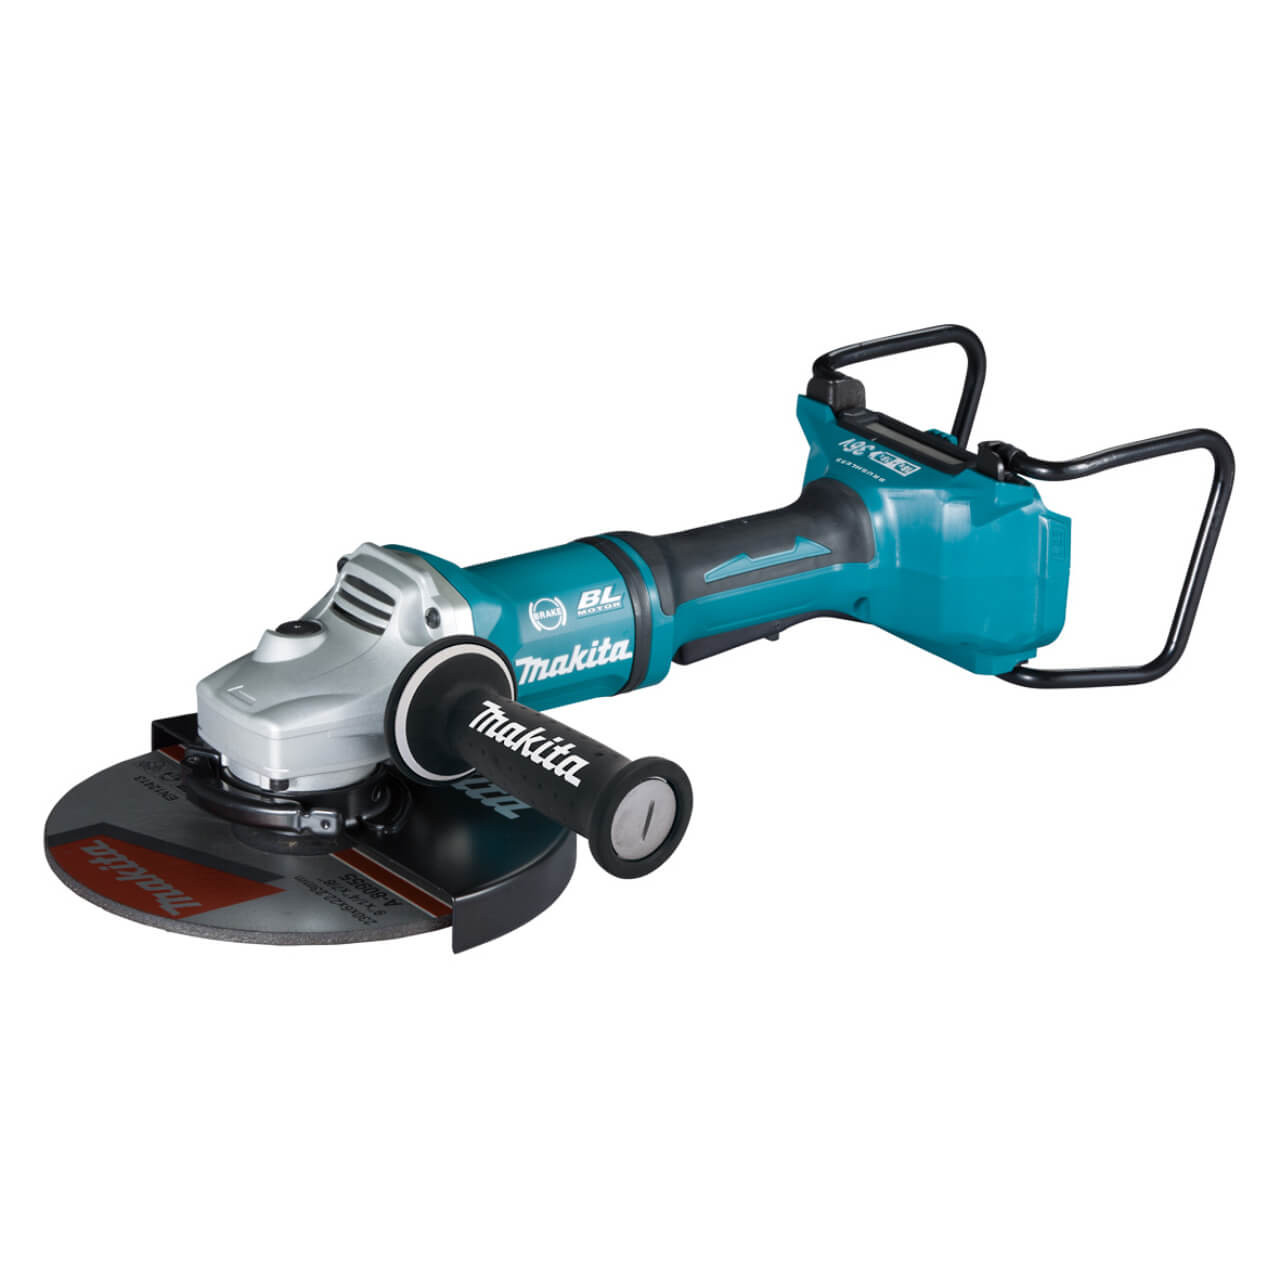 Makita 18Vx2 BRUSHLESS 230mm Angle Grinder. Paddle Switch. Kick Back Detection. Electric Brake. Anti-Vib Handle & Carry Case - Tool Only